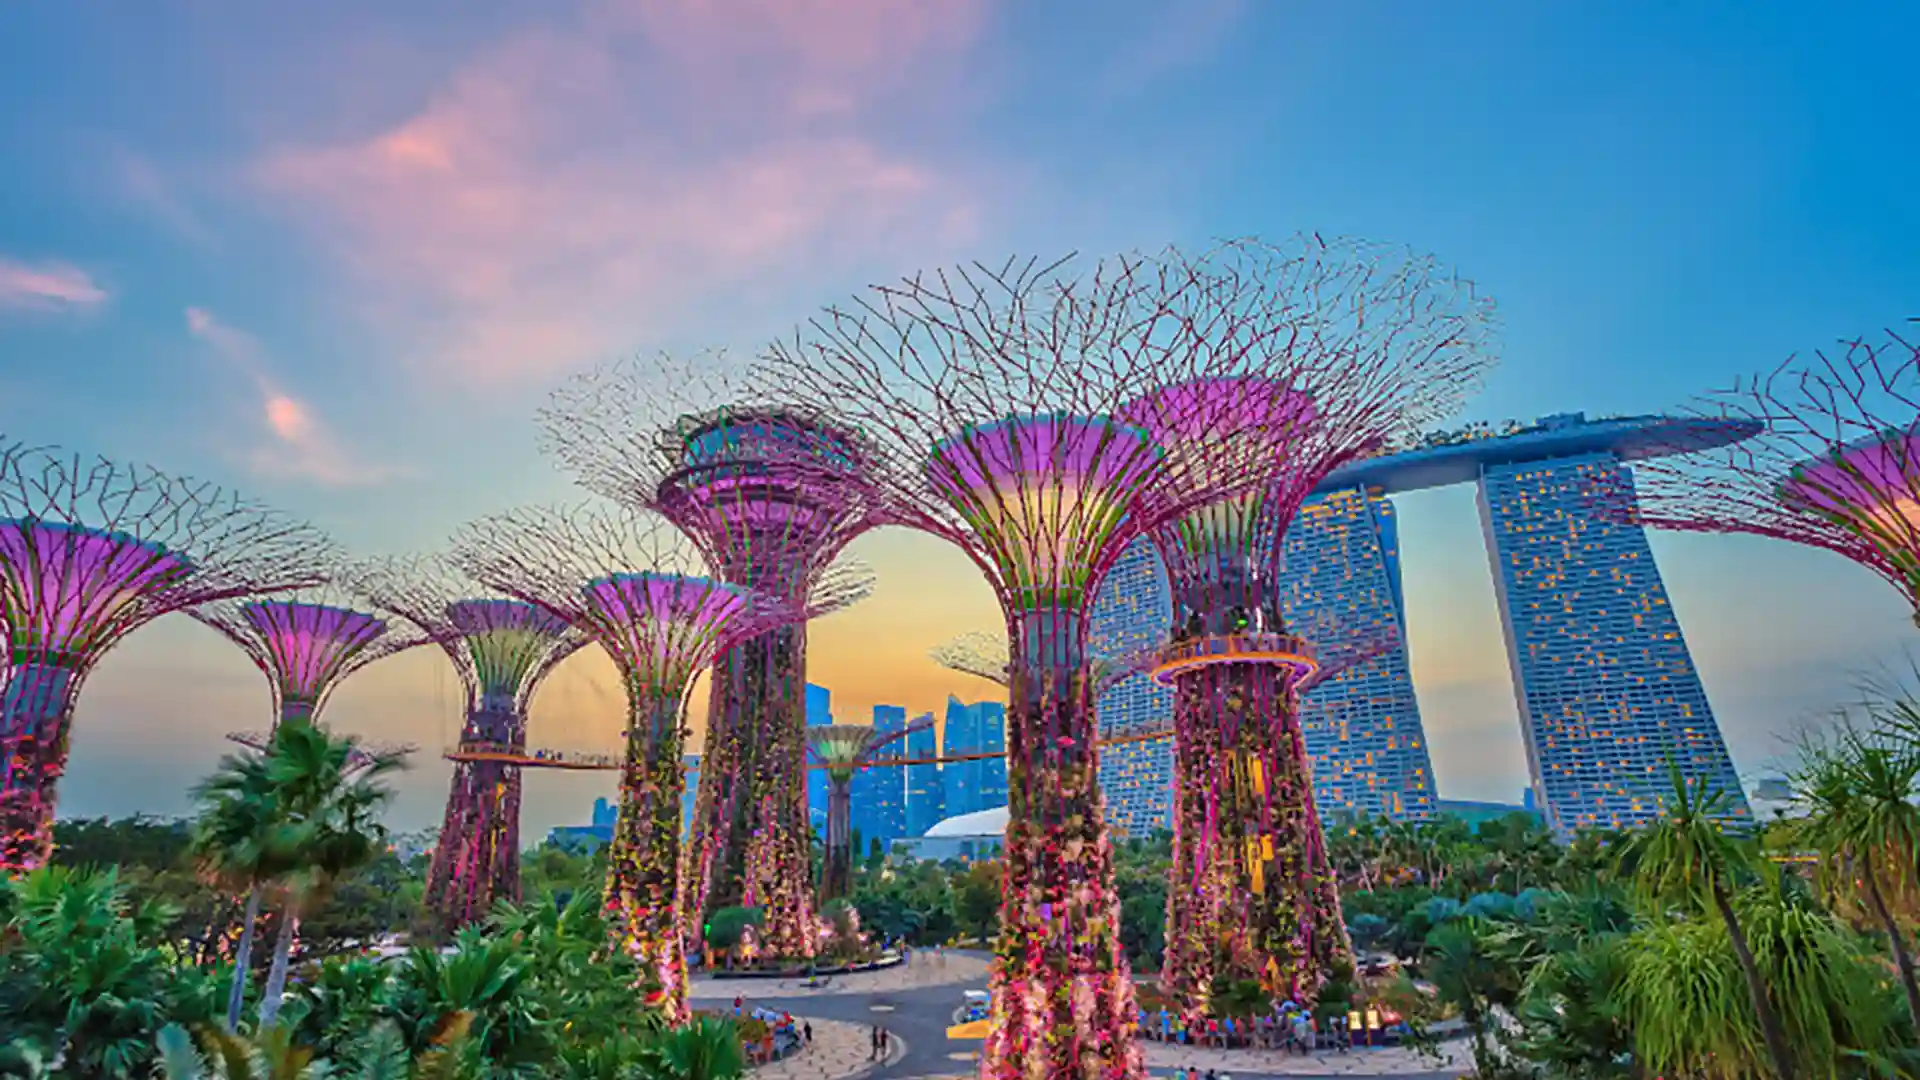 View of Singapore's Gardens by the Bay with structures covered in multicolored lights.